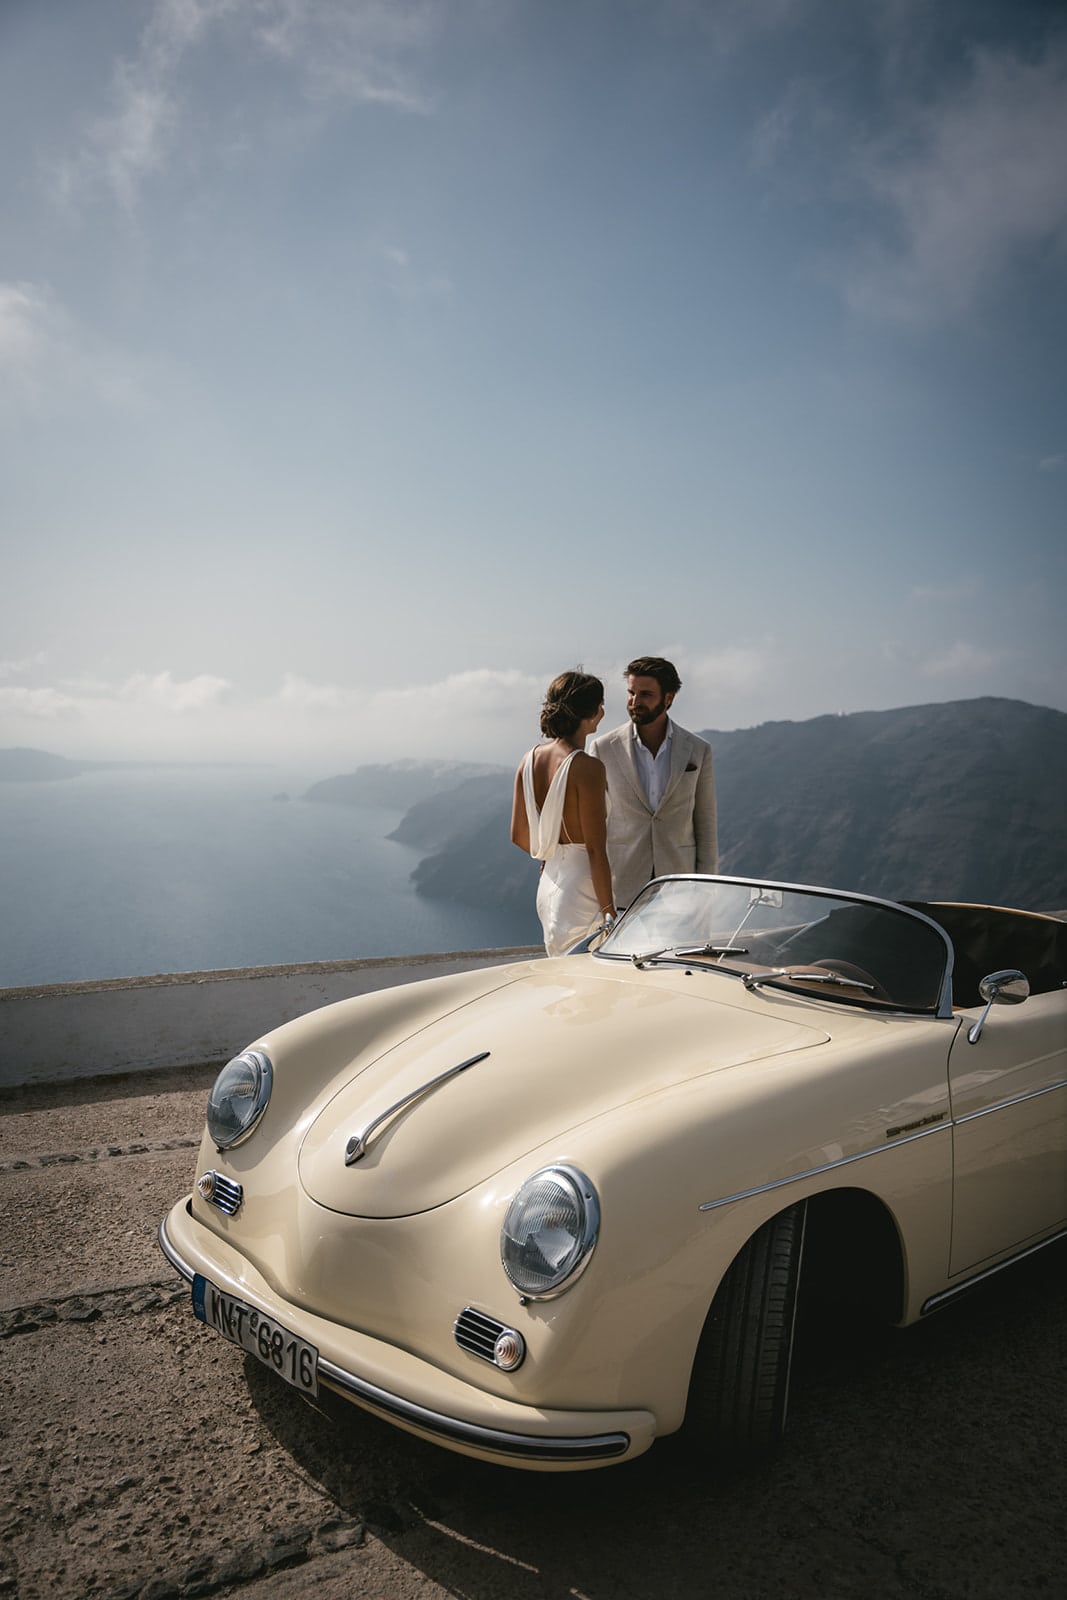 With the azure sea behind, their love story takes a picturesque turn beside the vintage car